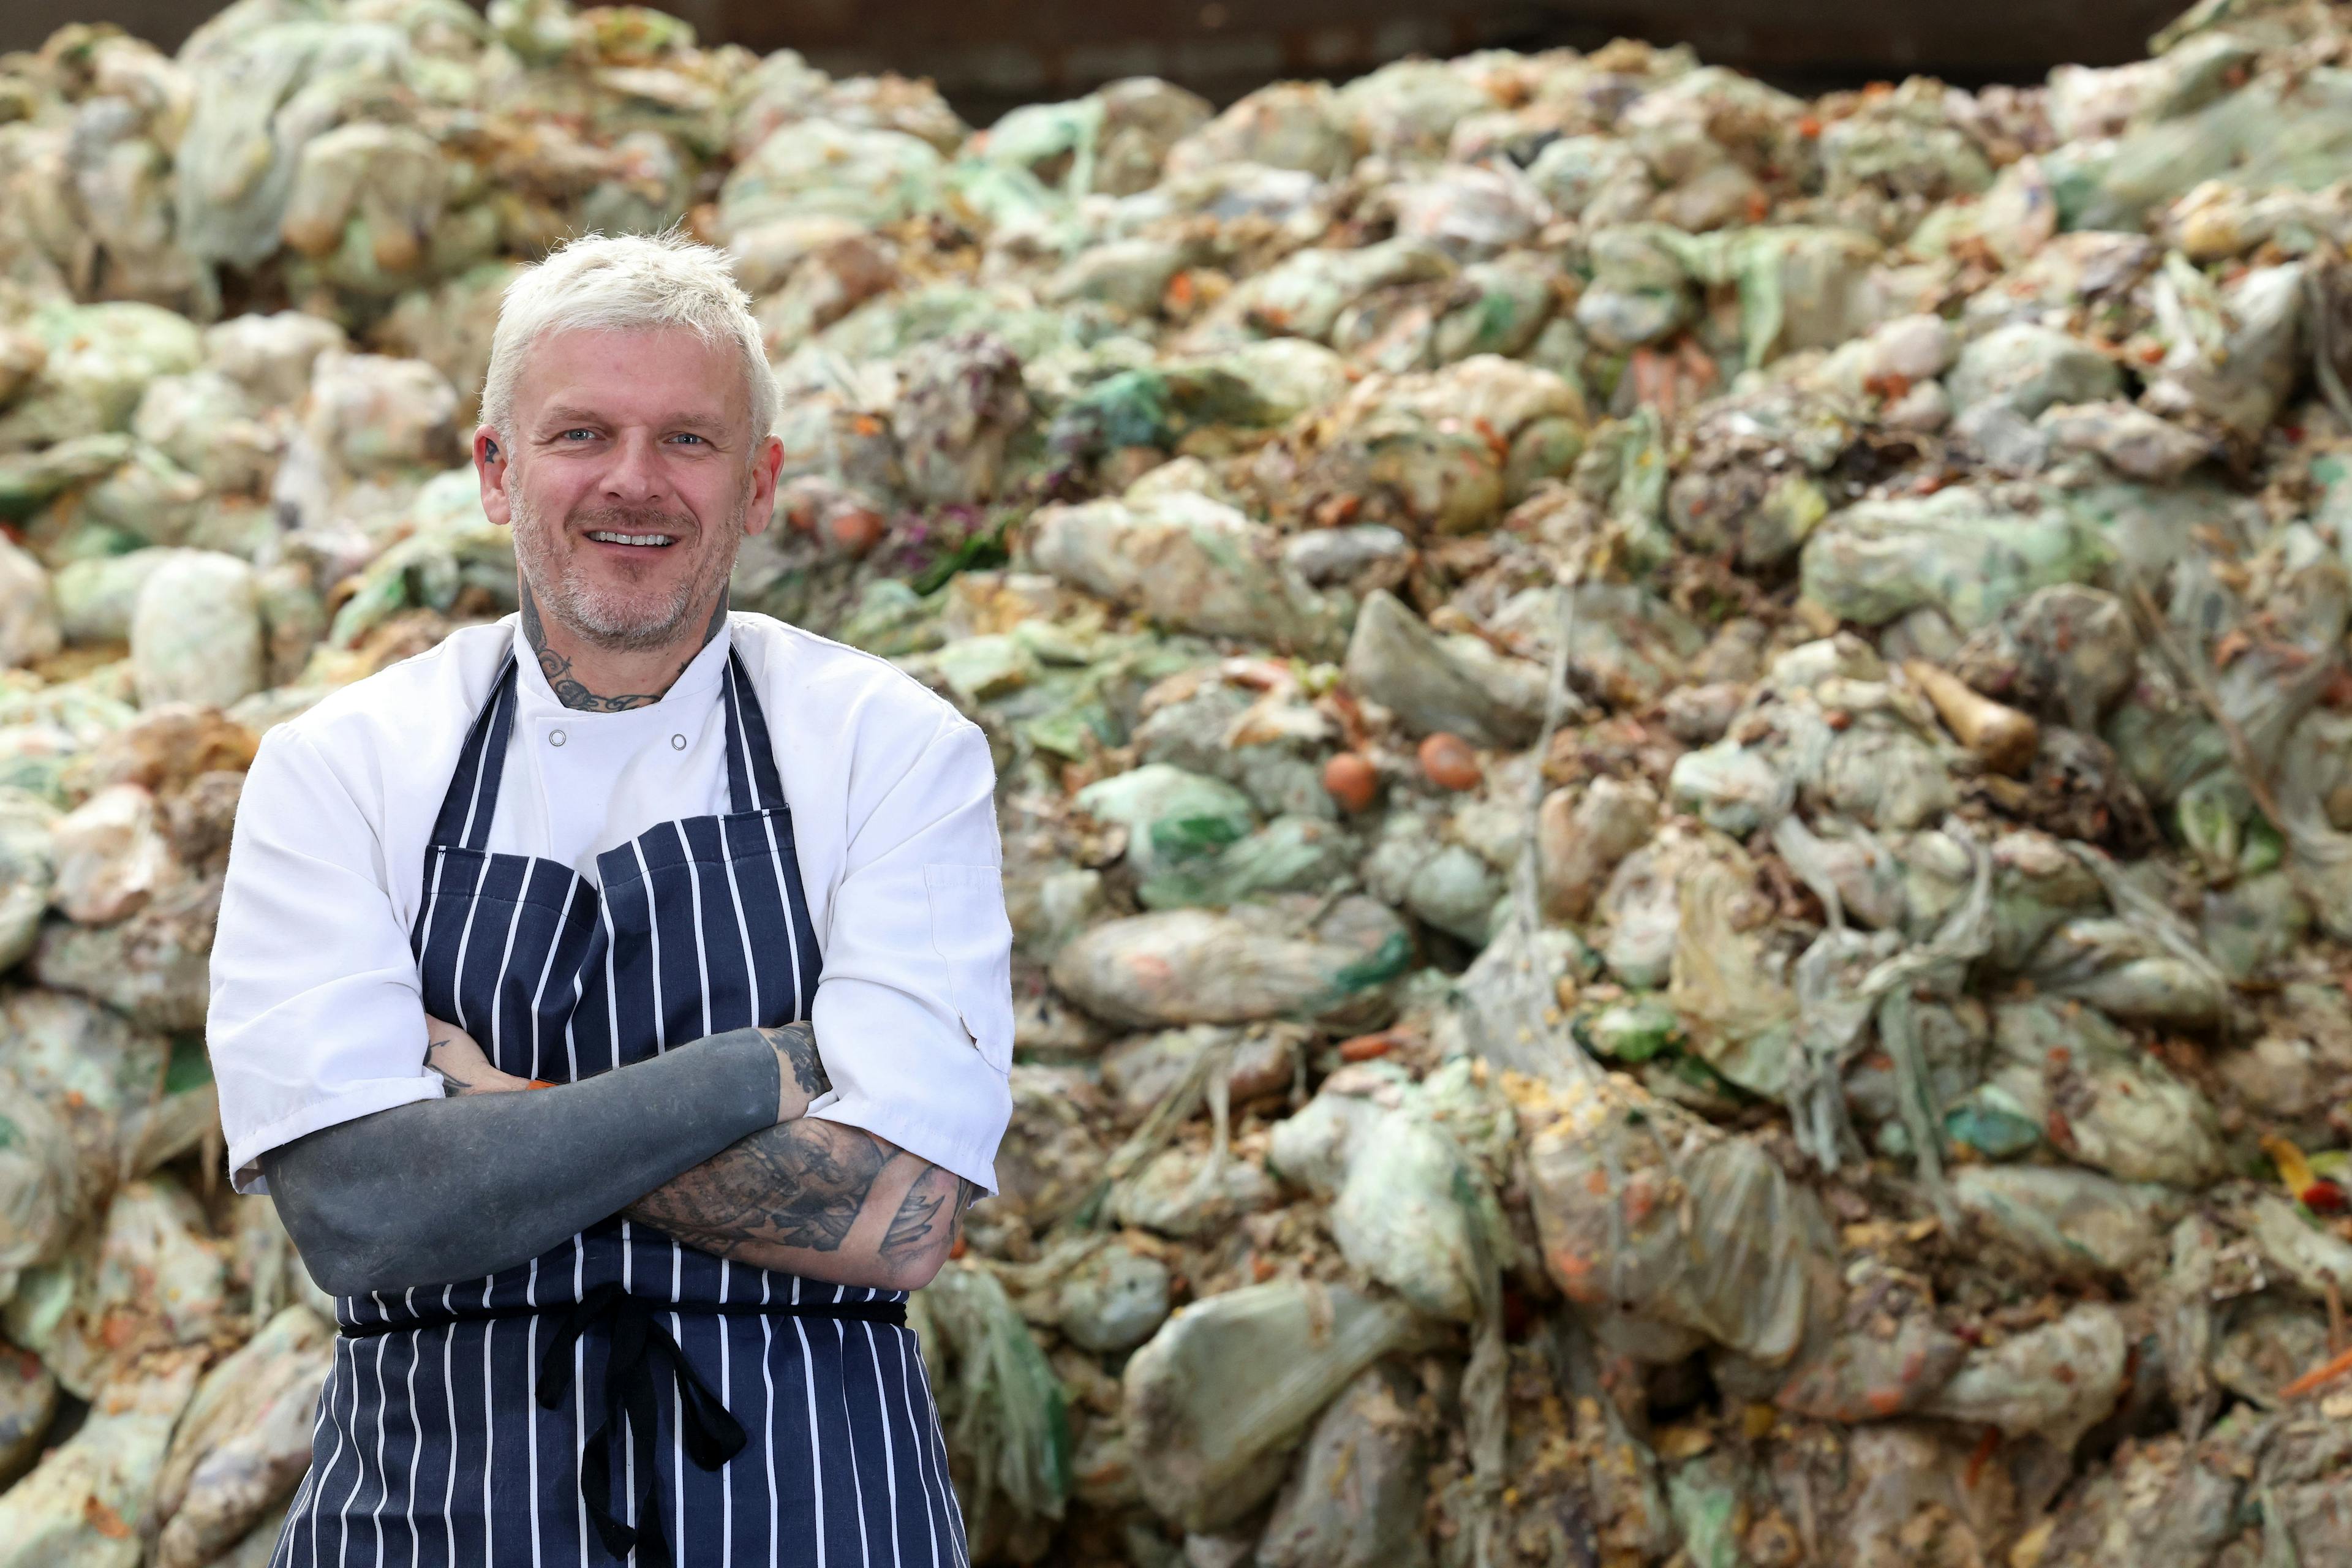 Matt Pritchard, a blonde white man with tattoos in a chef uniform, standing in from of a stack of full food recycling bags.